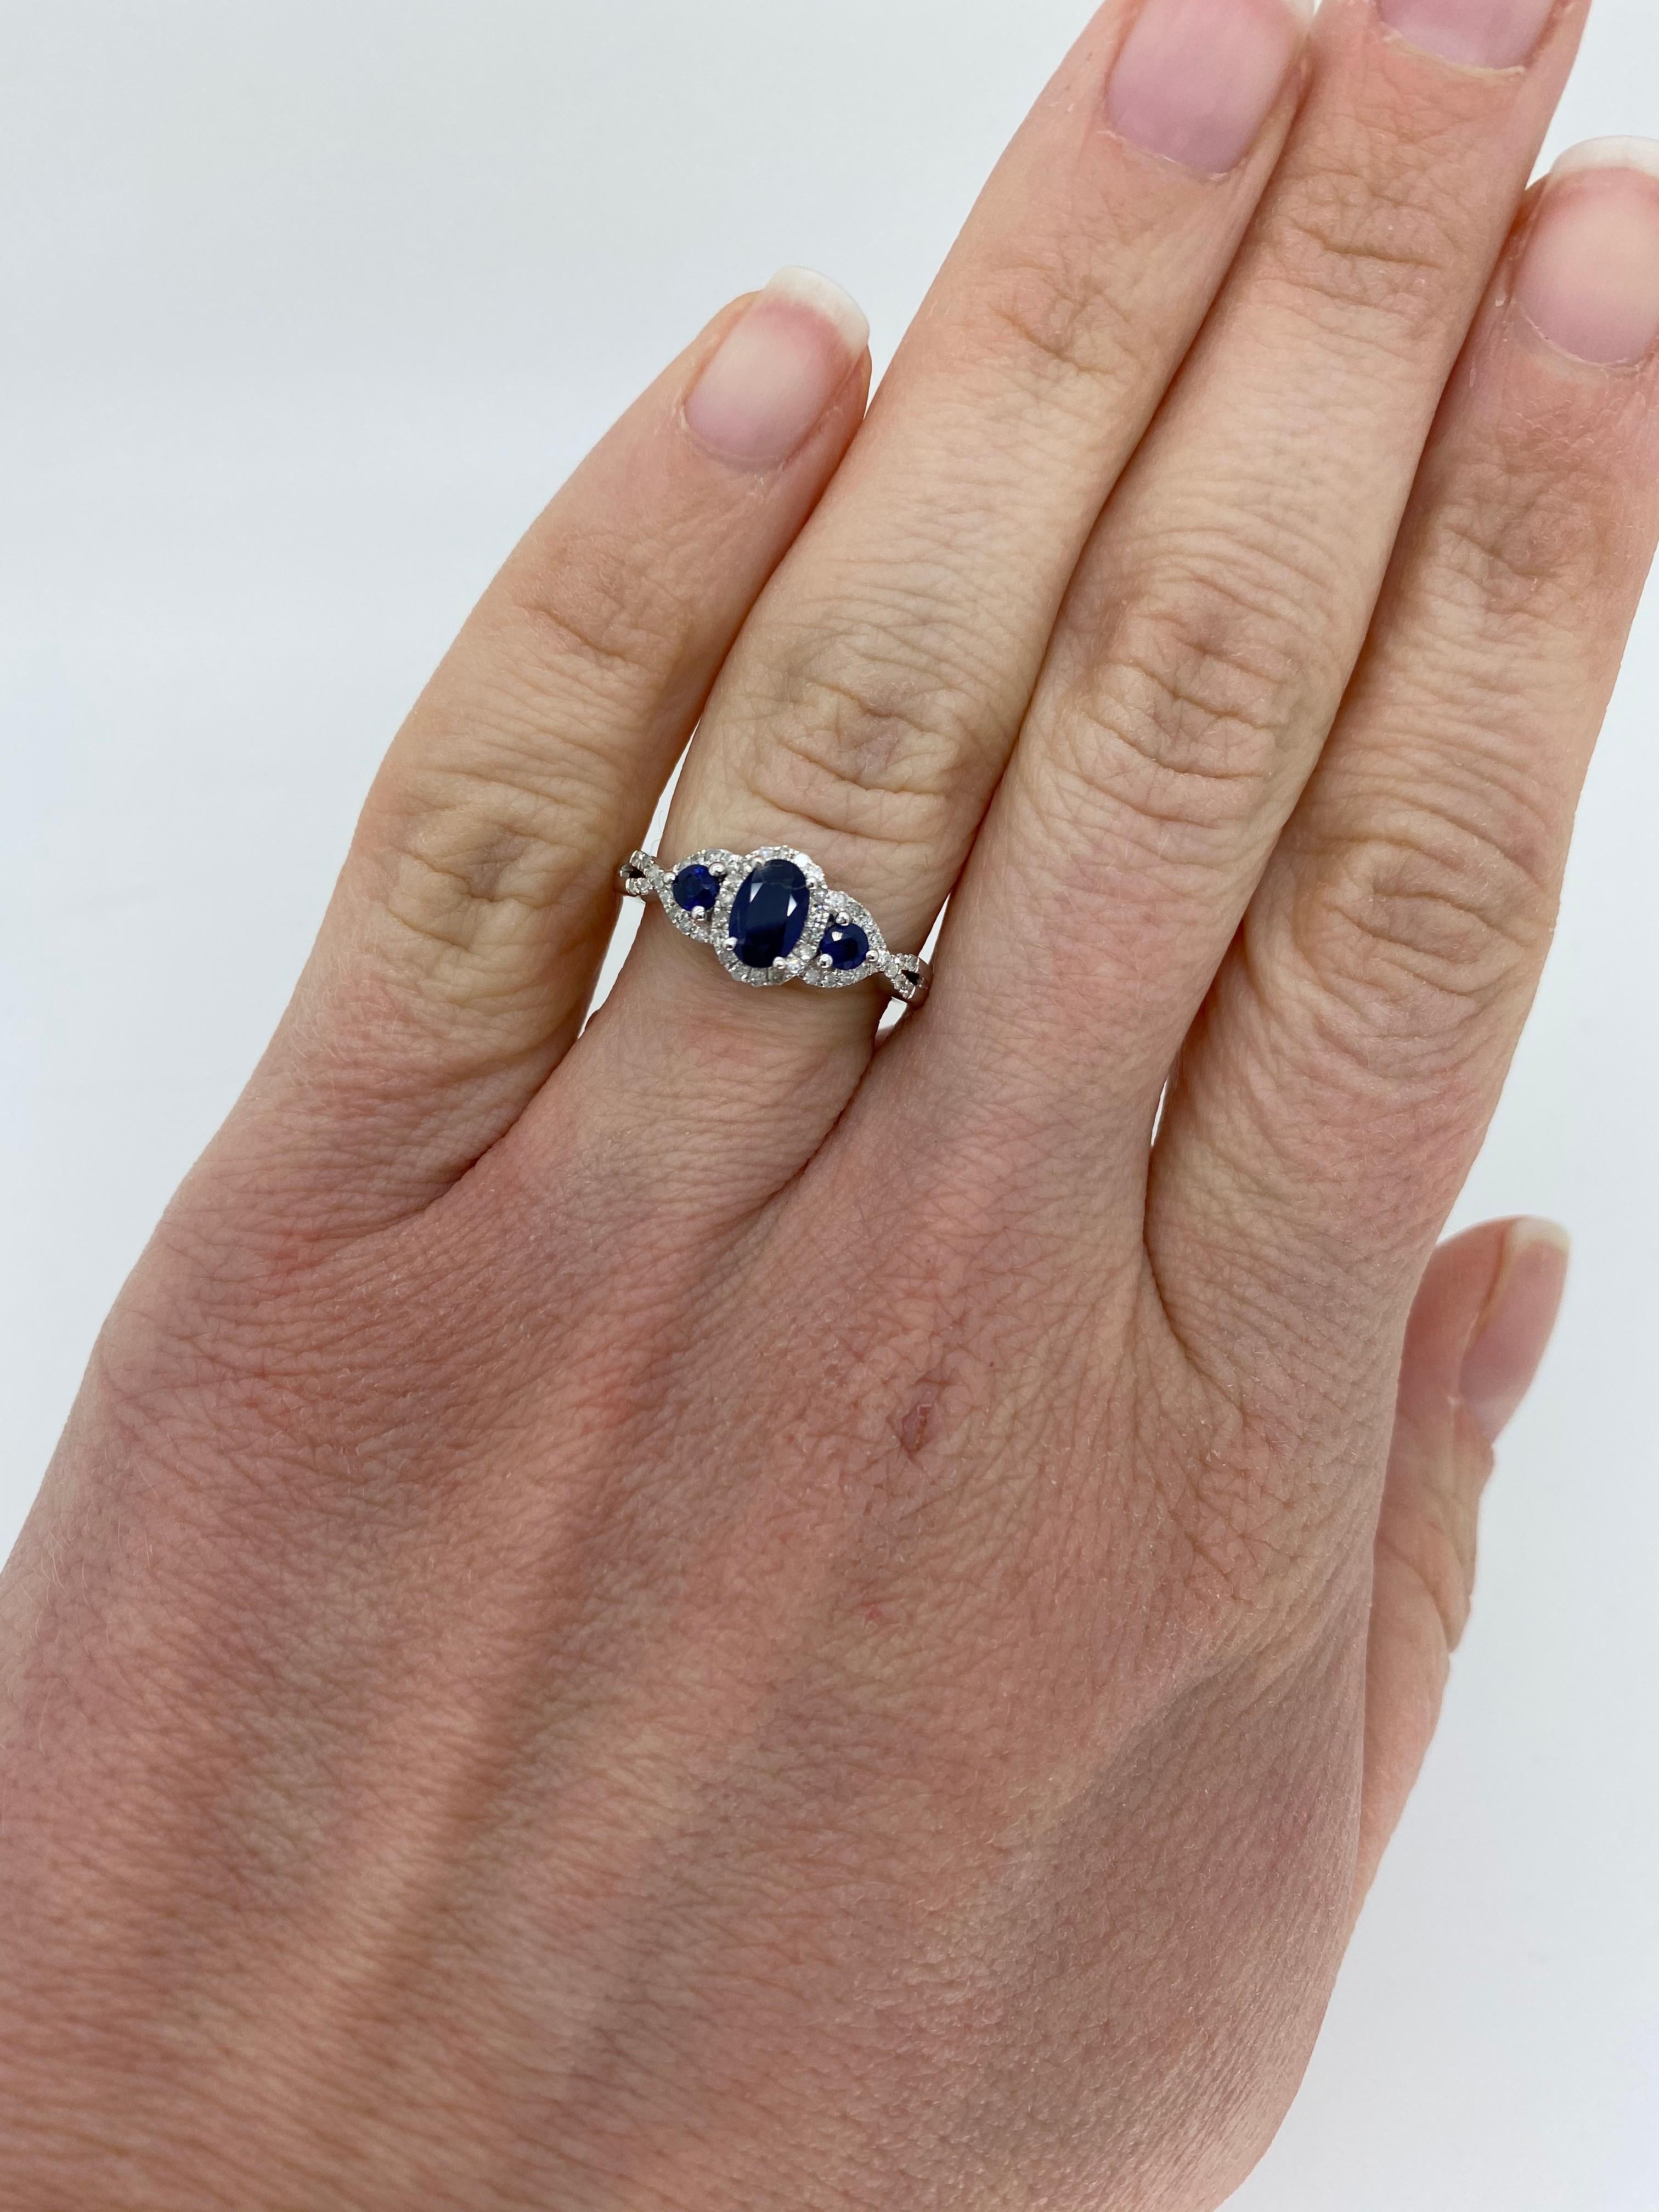 Triple halo sapphire and diamond ring crafted in 10k white gold. 

Gemstone: Sapphire & Diamonds
Gemstone Carat Weight: One Approximately 5.96x4.17mm Sapphire, Two Approximately 2.60mm Sapphires
Diamond Carat Weight: Approximately .20CTW 
Diamond